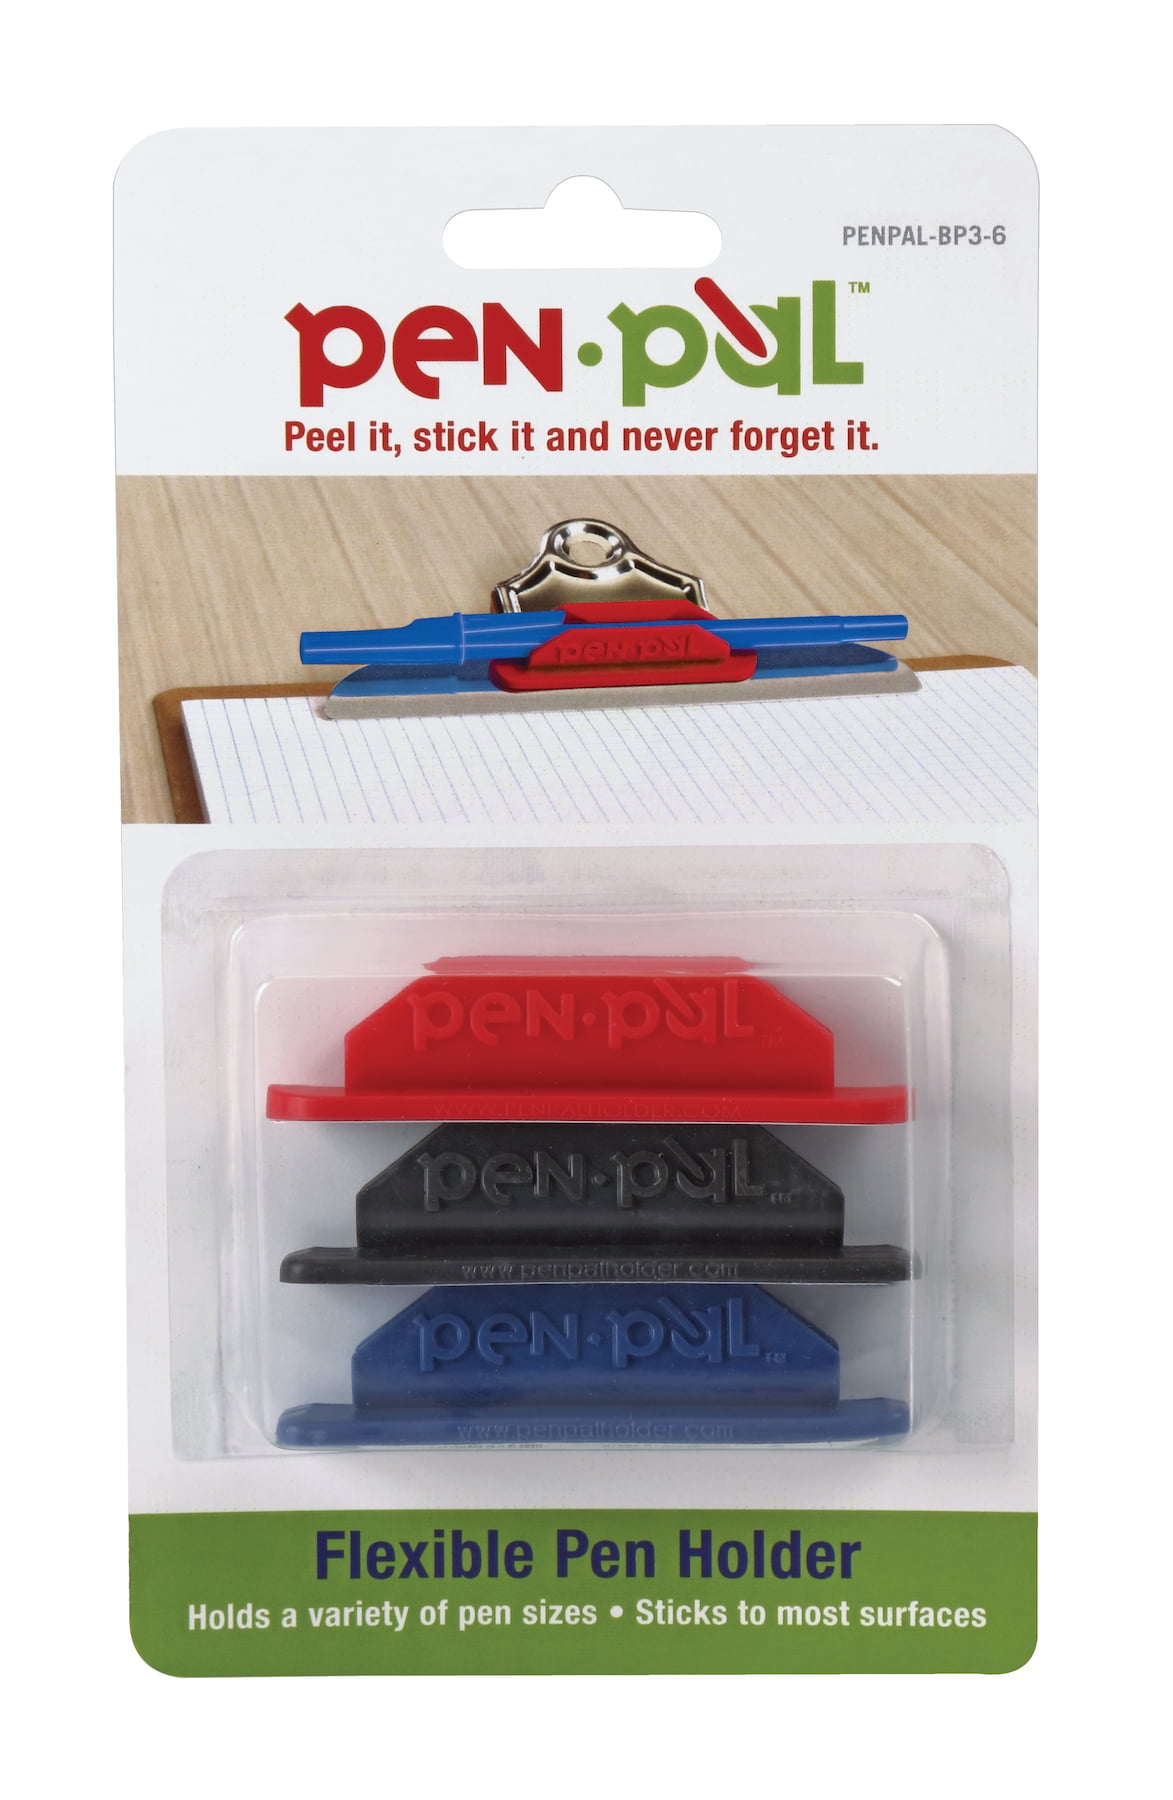 TOPS Pen Pal Flexible Pen Holders, Rubber Material, Assorted Colors, Pack of 3